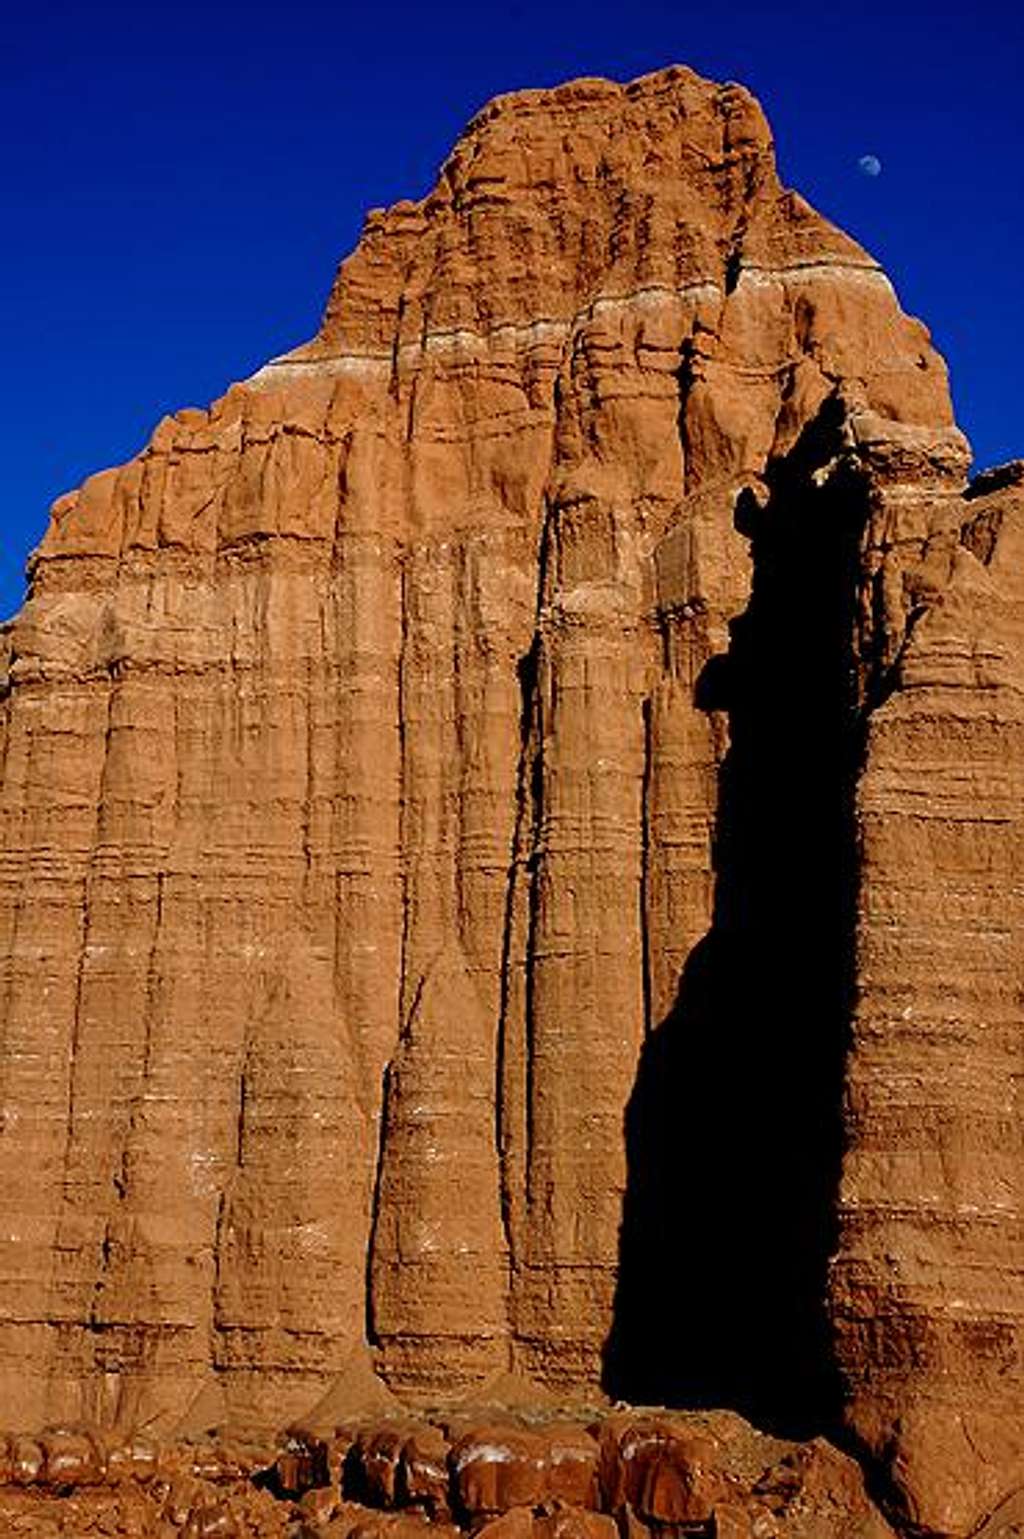 The Moon over <i>The Temple of the Moon</i>, Capitol Reef National Park